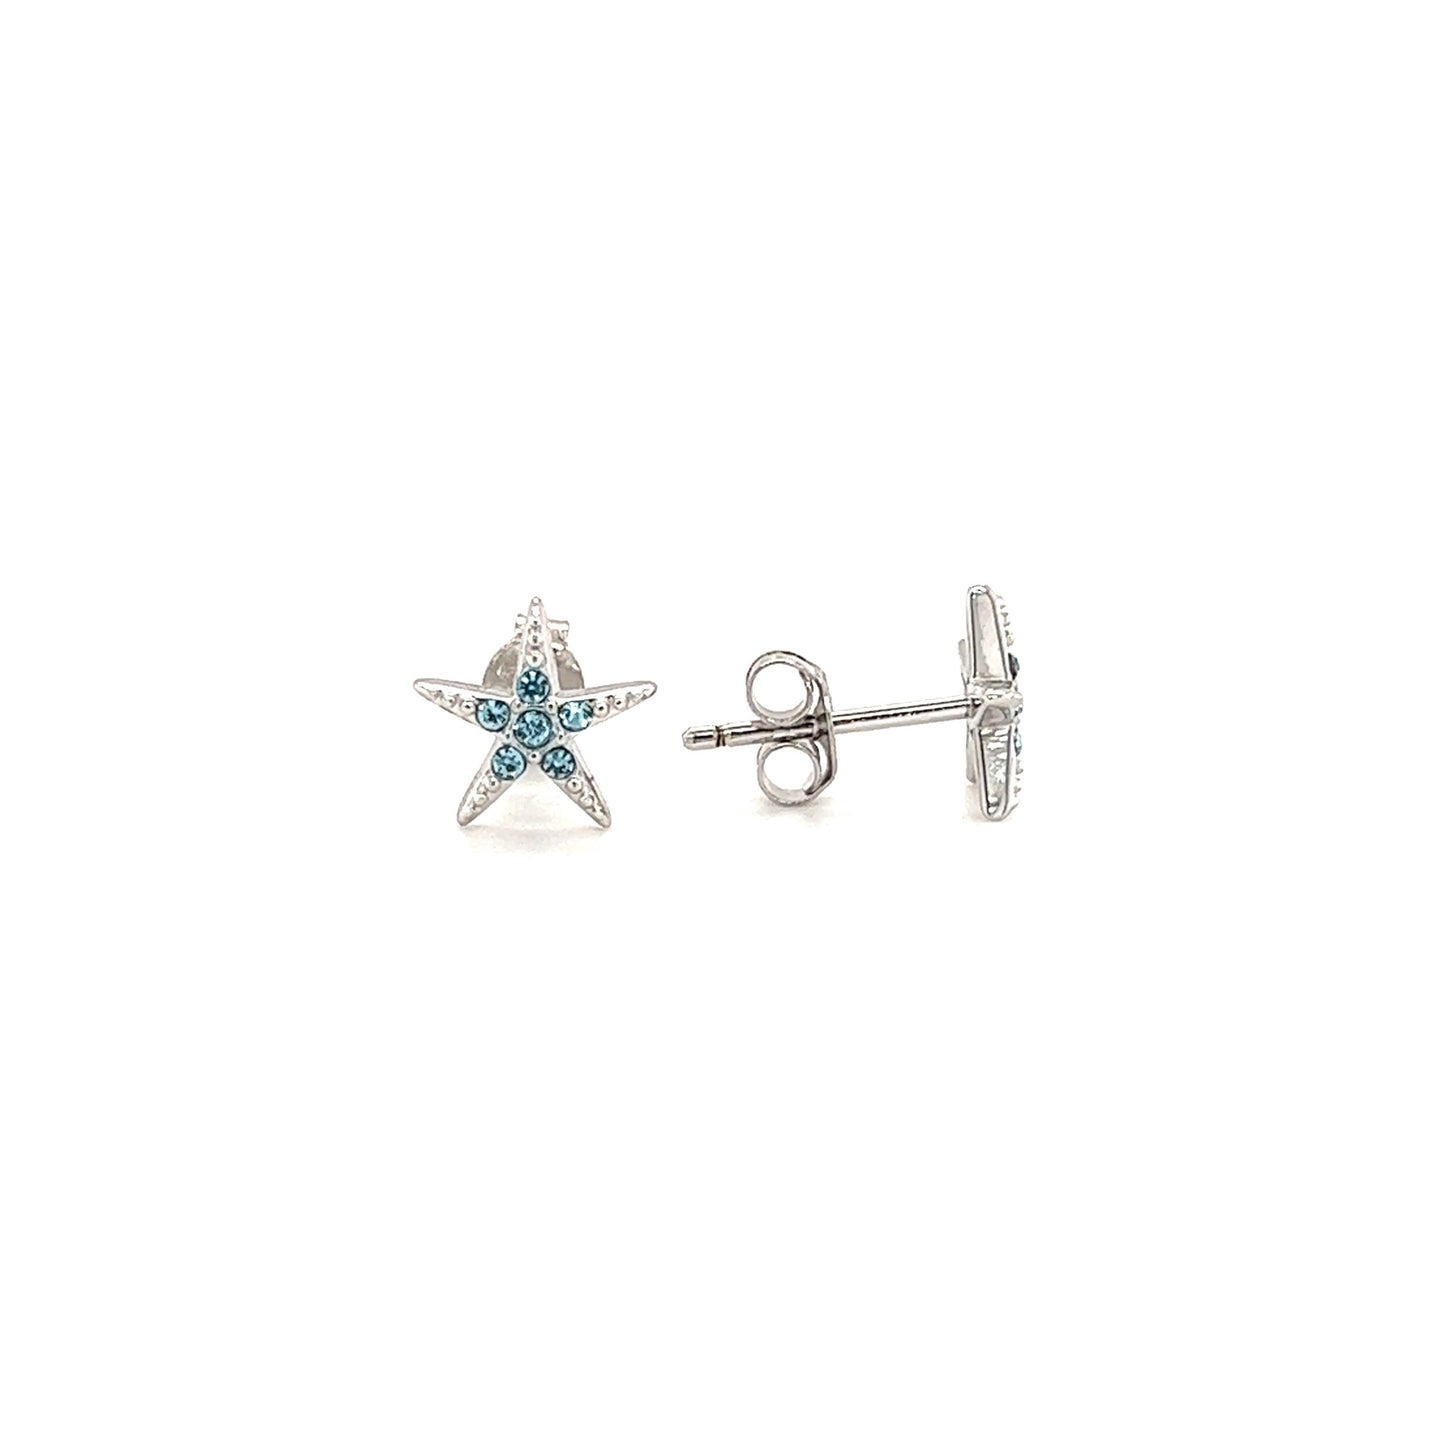 Starfish Stud Earrings with Aqua Crystals in Sterling Silver Front and Side View